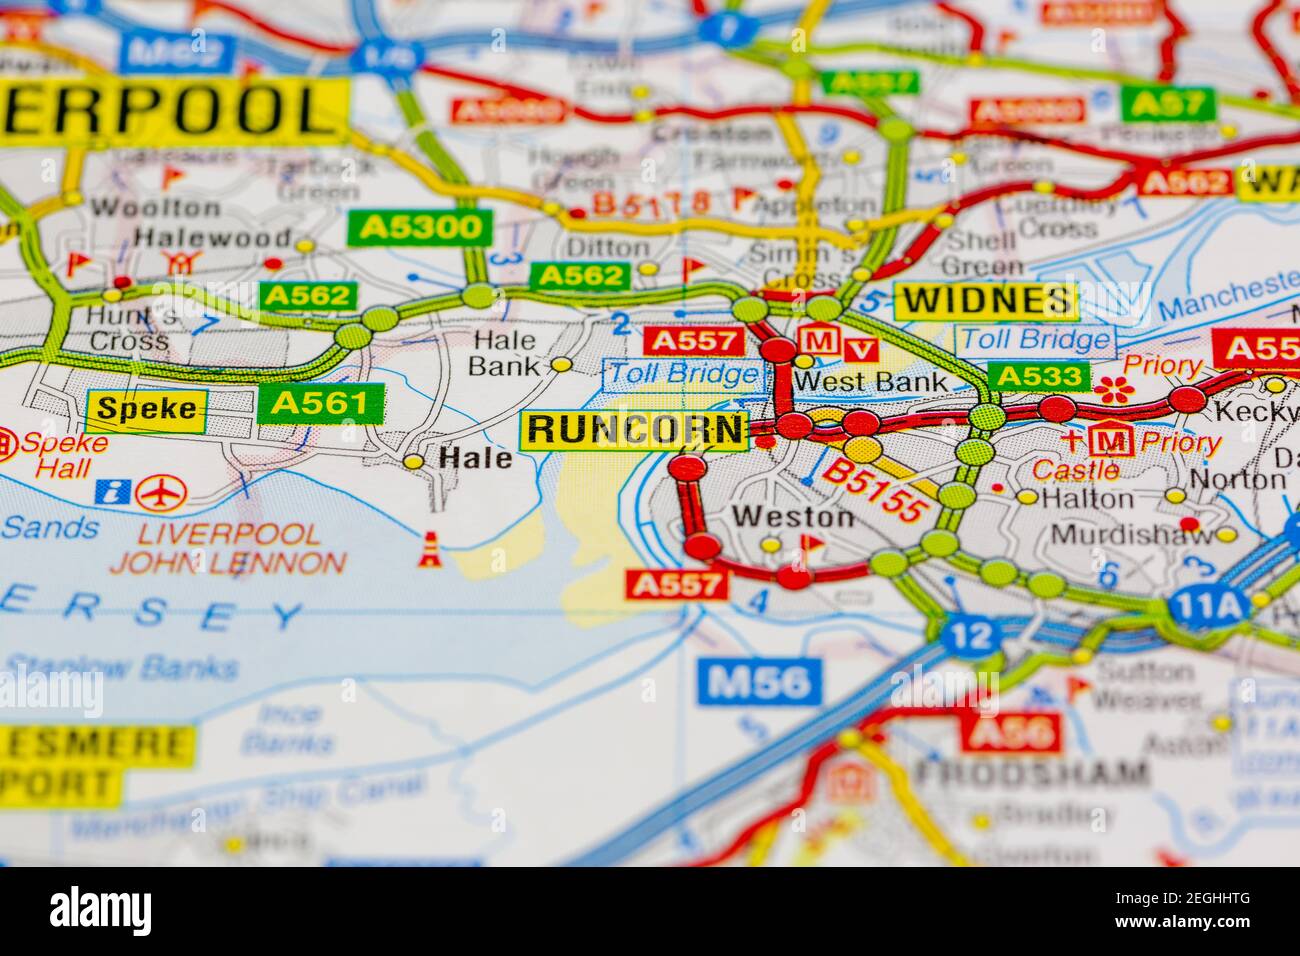 runcorn and surrounding areas shown on a road map or geography map Stock Photo